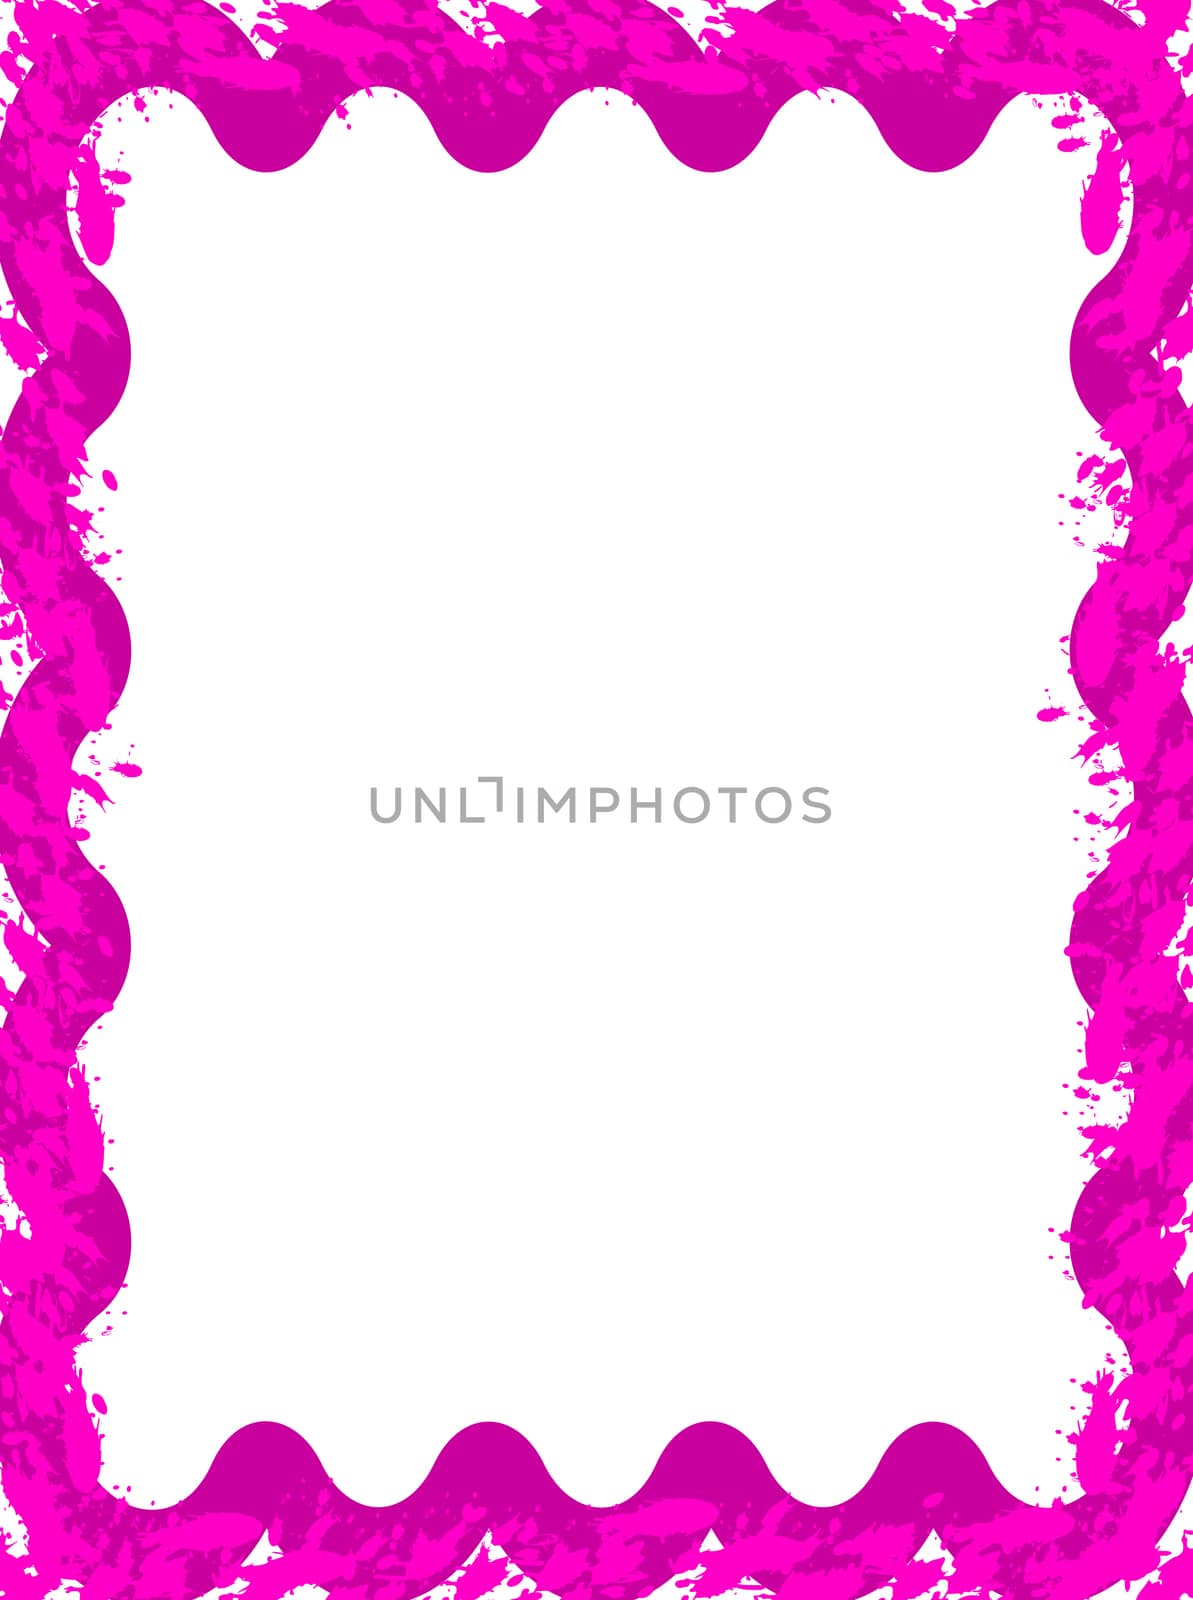 Abstract background Illustration